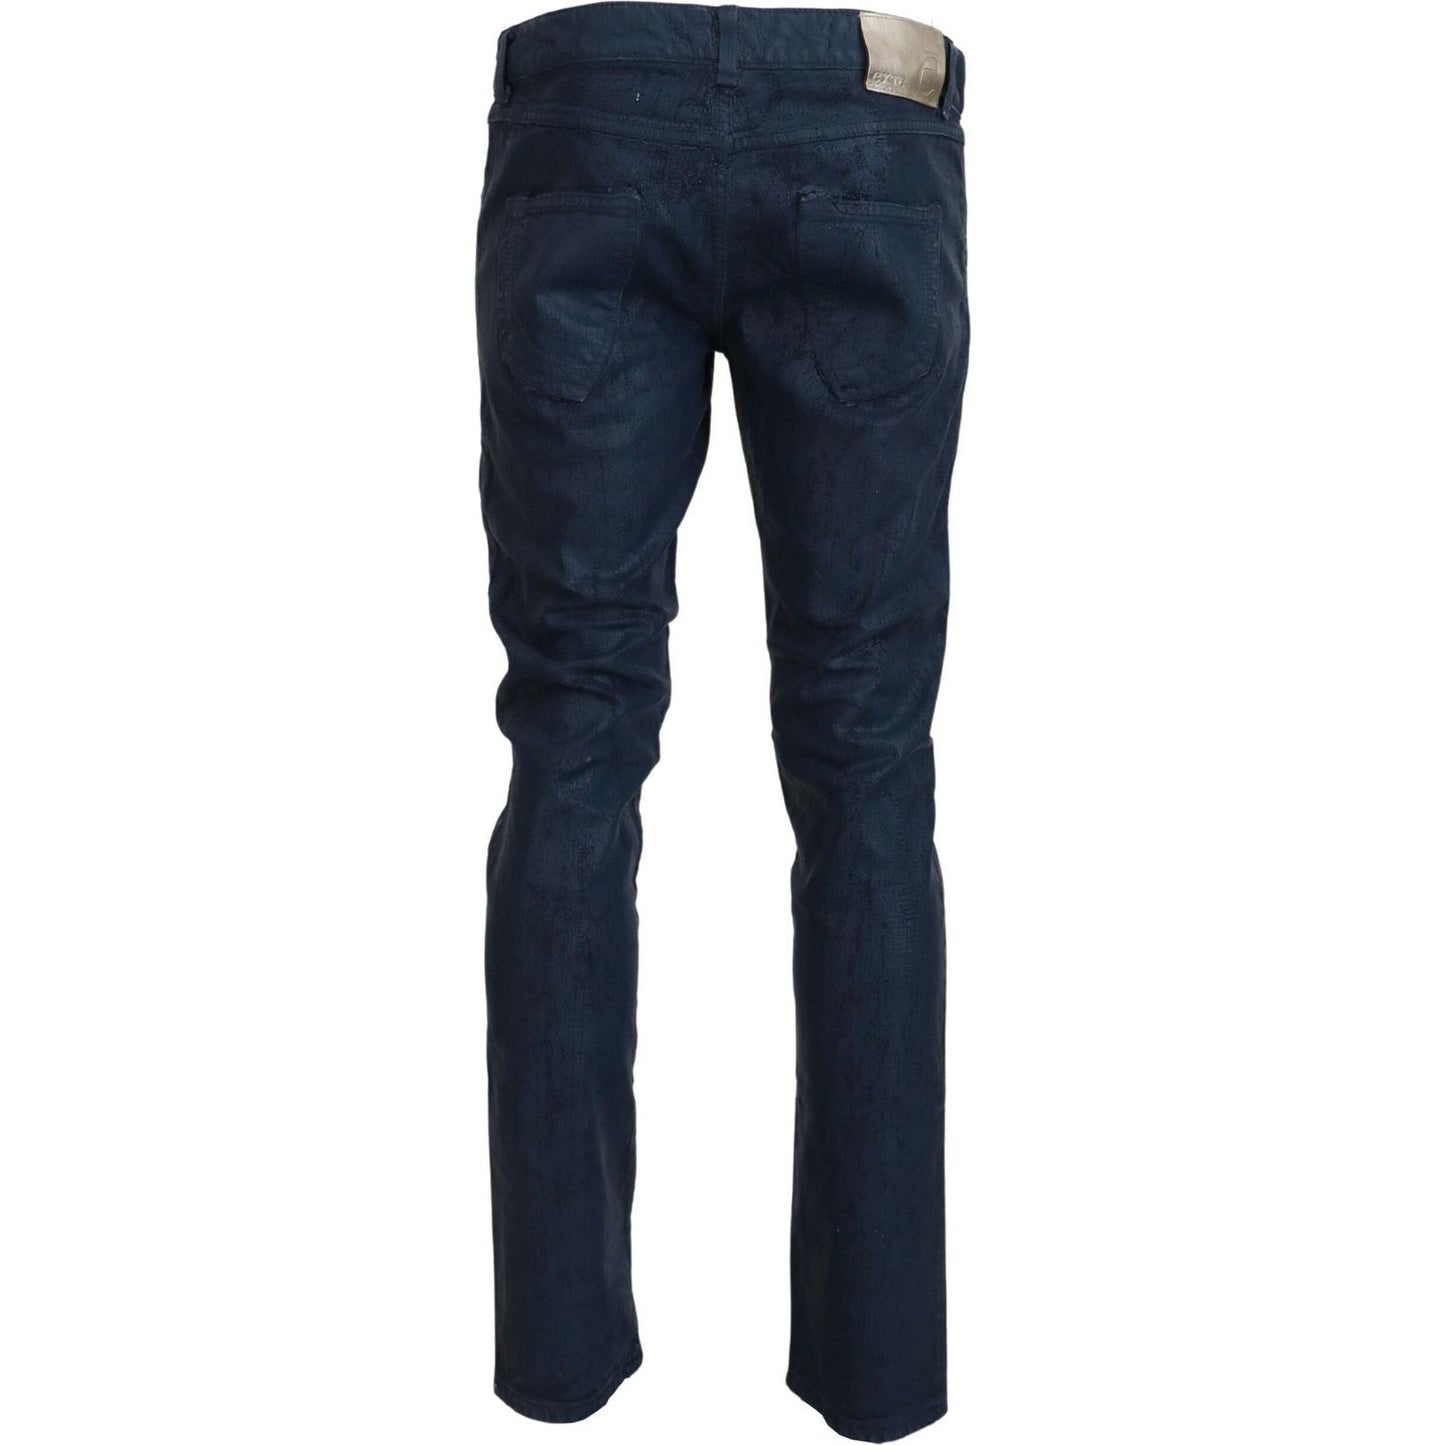 Exte Chic Tapered Blue Denim Jeans blue-cotton-tapered-slim-fit-men-casual-denim-jeans-1